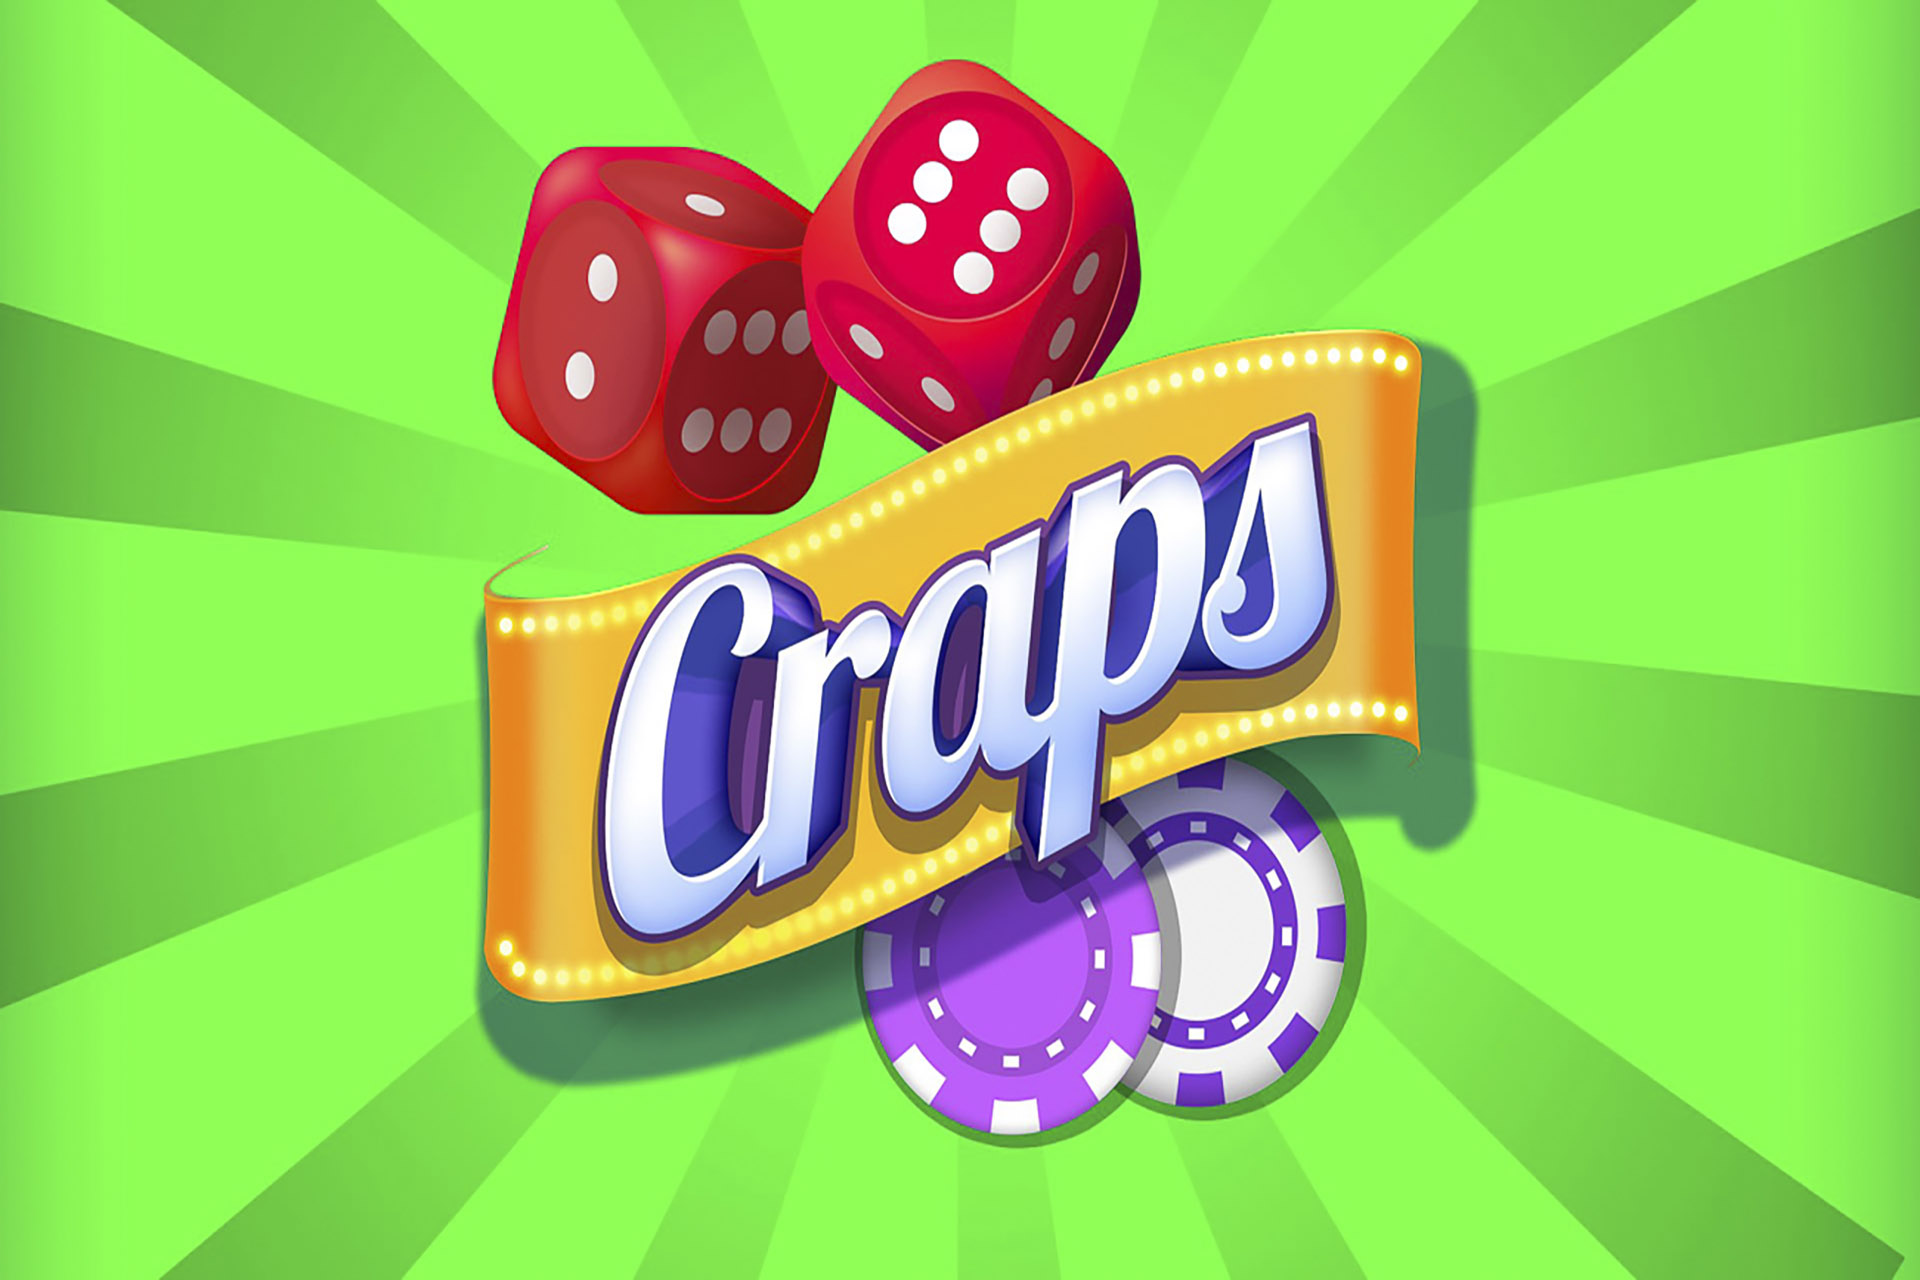 colorful picture of craps game